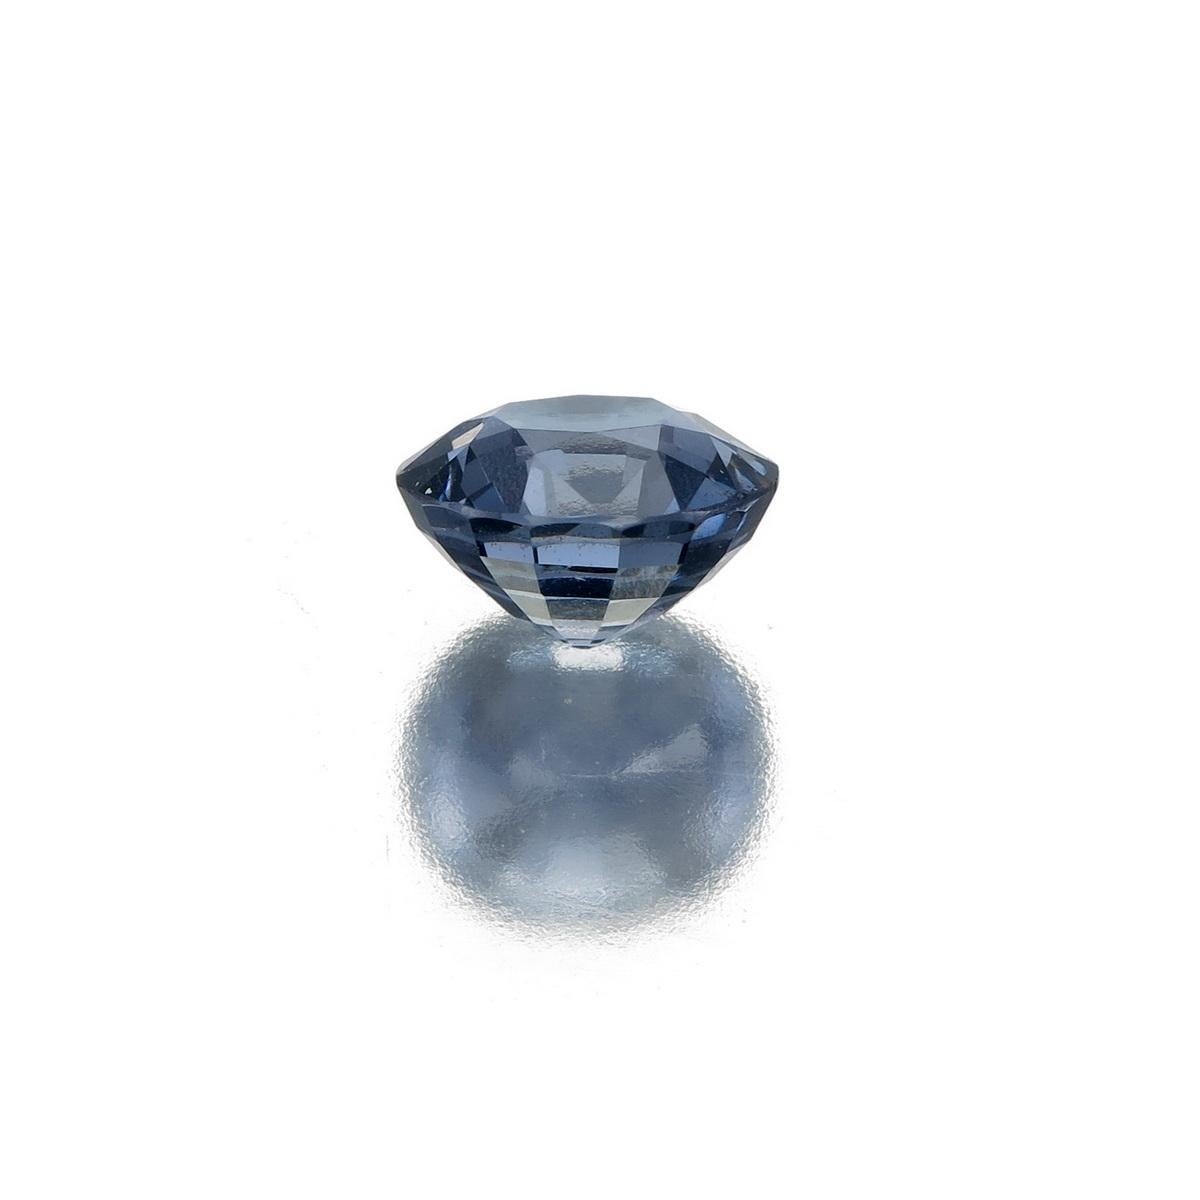 Oval Cut GIL Certified 1.91 Carat Cobalt Blue Natural Spinel from Burma For Sale